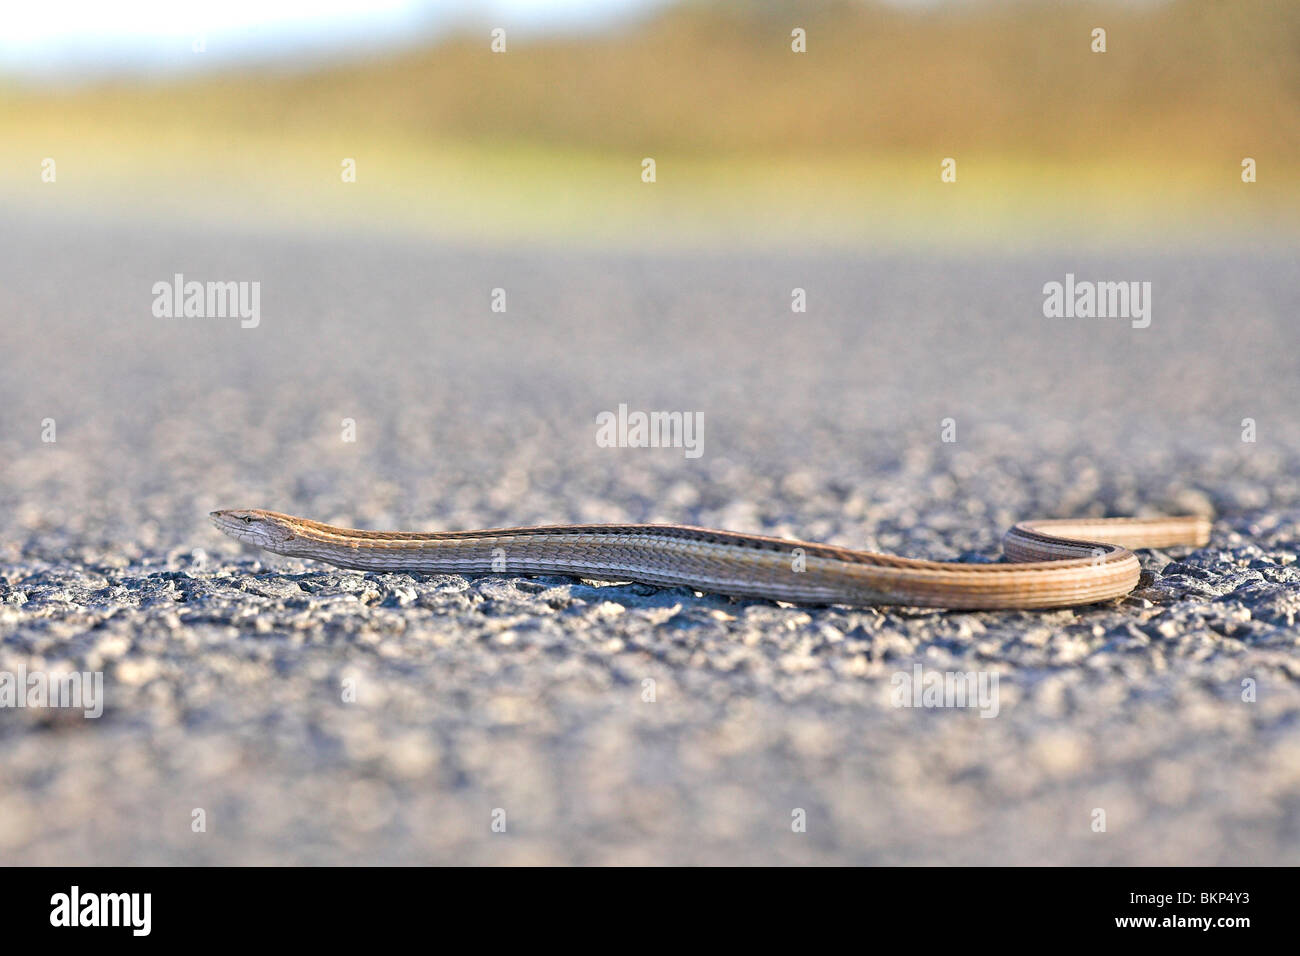 photo of a large scaled grass lizard crossing the tarred road Stock Photo